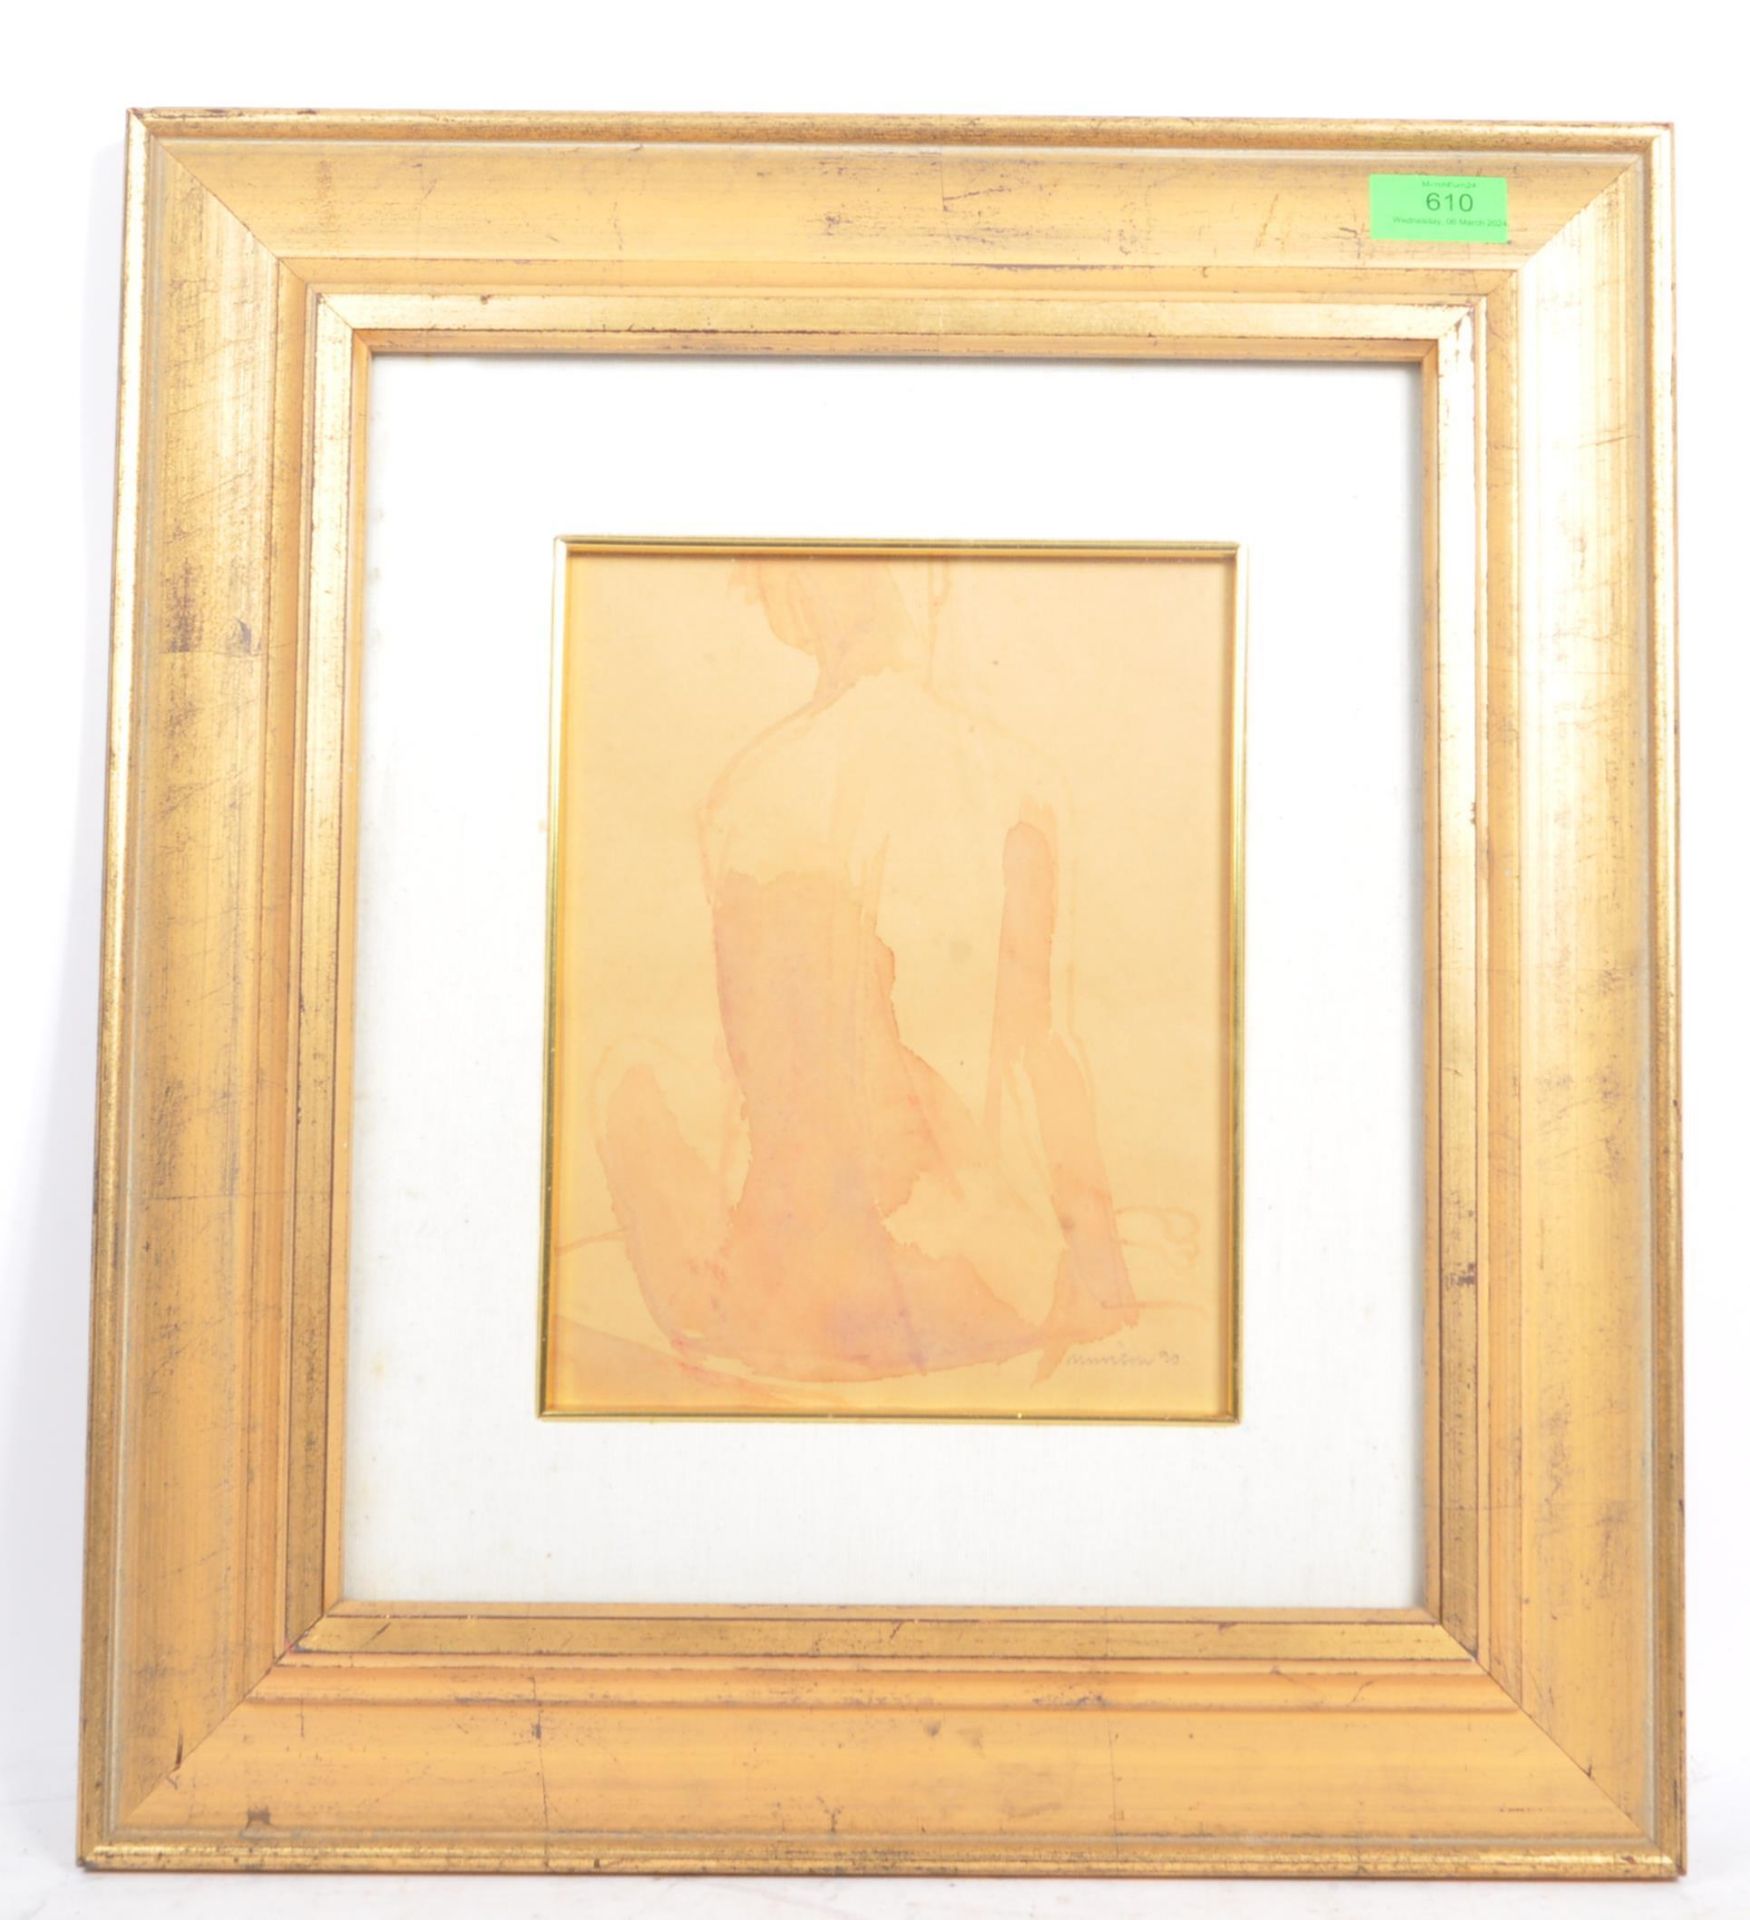 1990S WATERCOLOUR ON PAPER NUDE PORTRAIT SIGN & FRAMED - Image 2 of 5